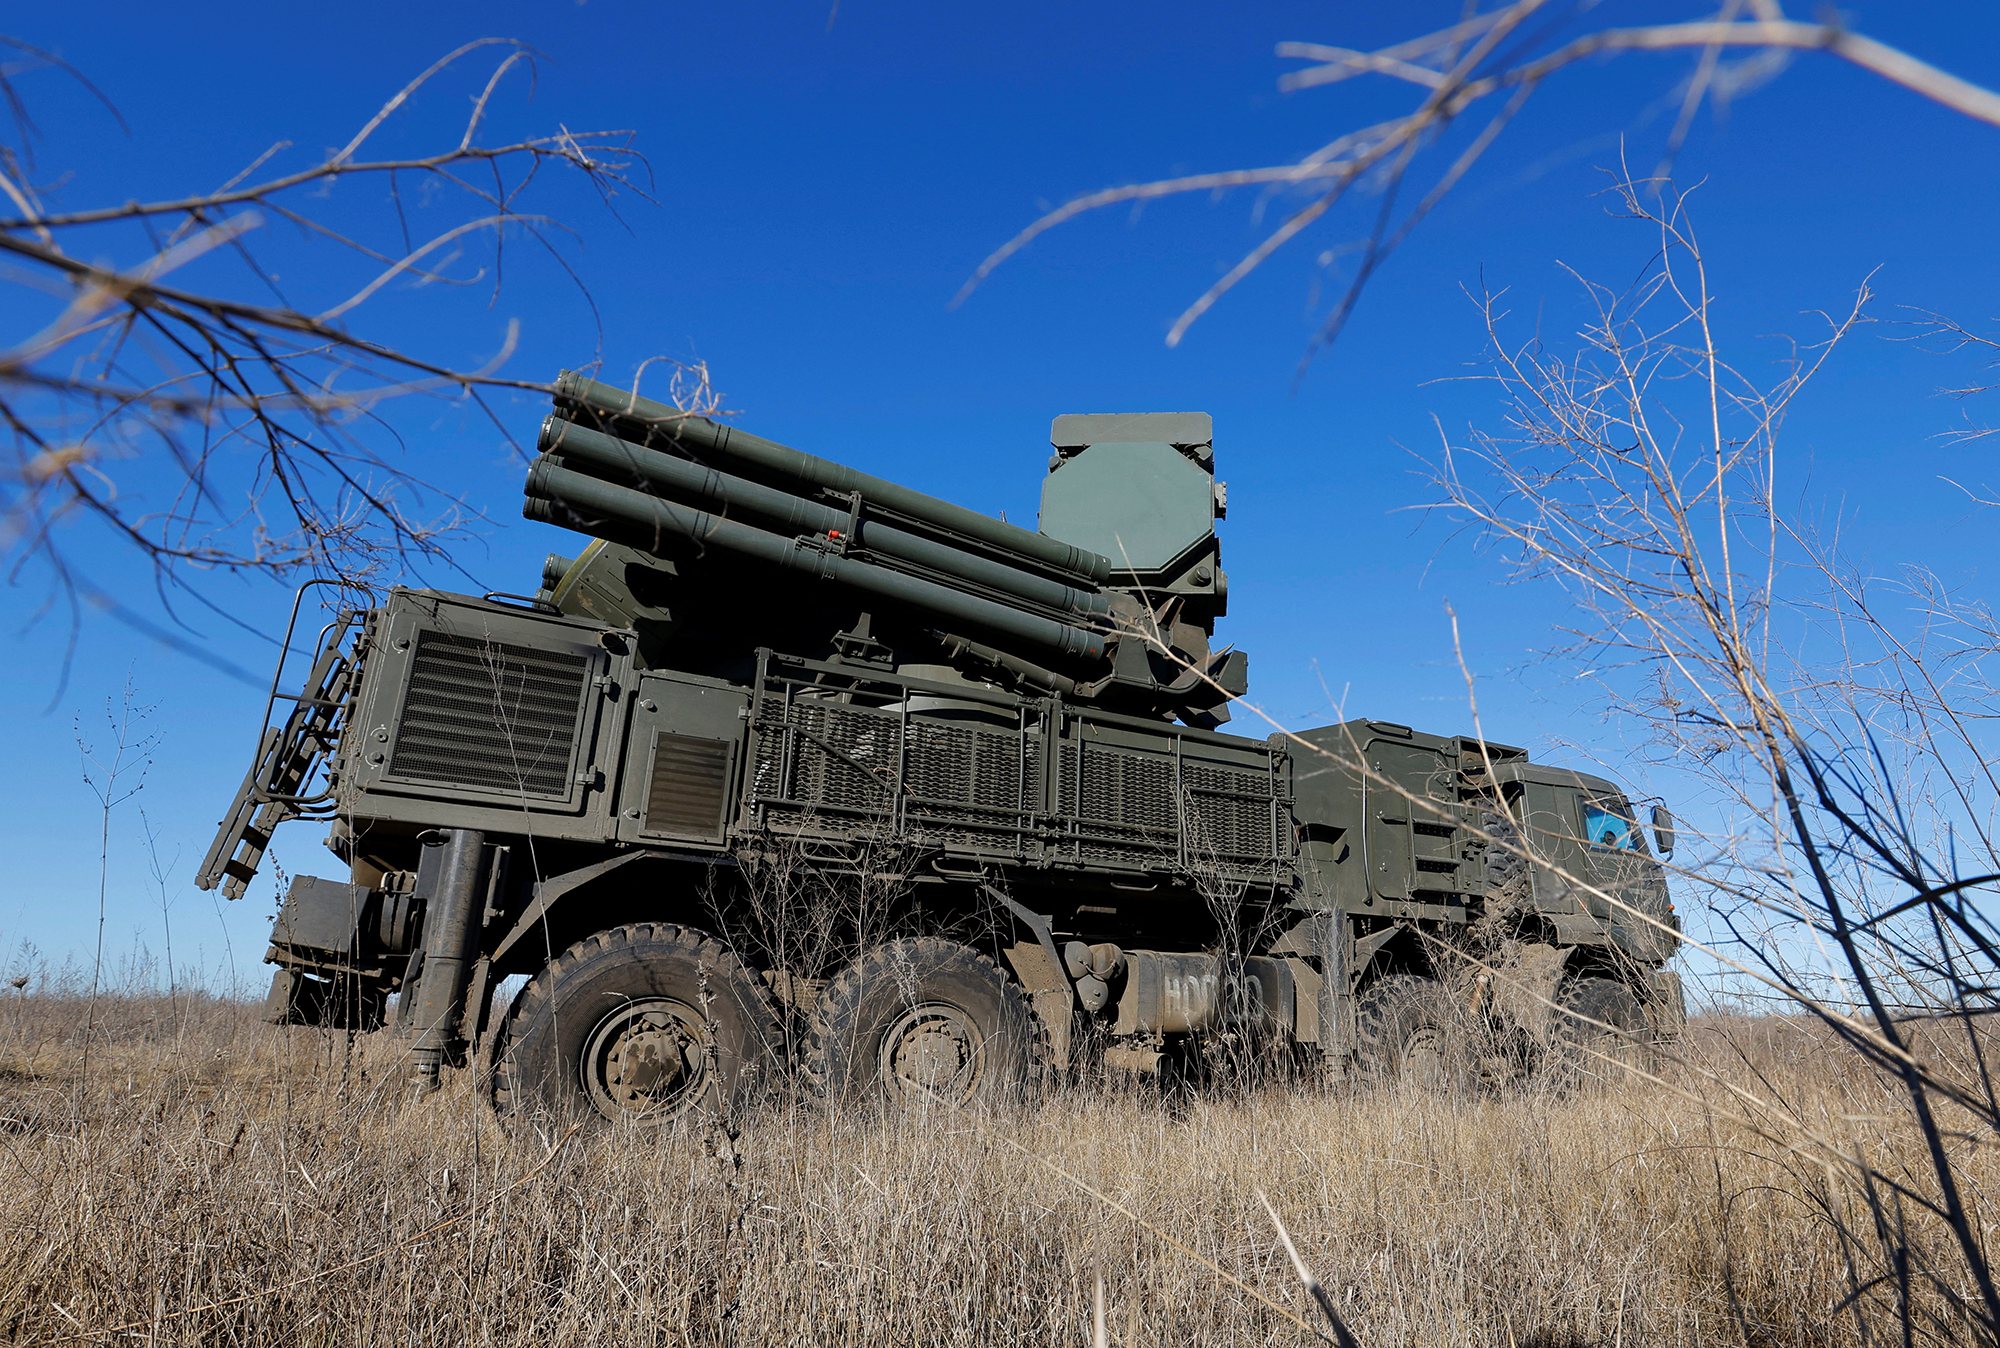 A Russian Pantsir anti-aircraft missile system on combat duty in the Luhansk region, Russian-controlled Ukraine, on January 25.